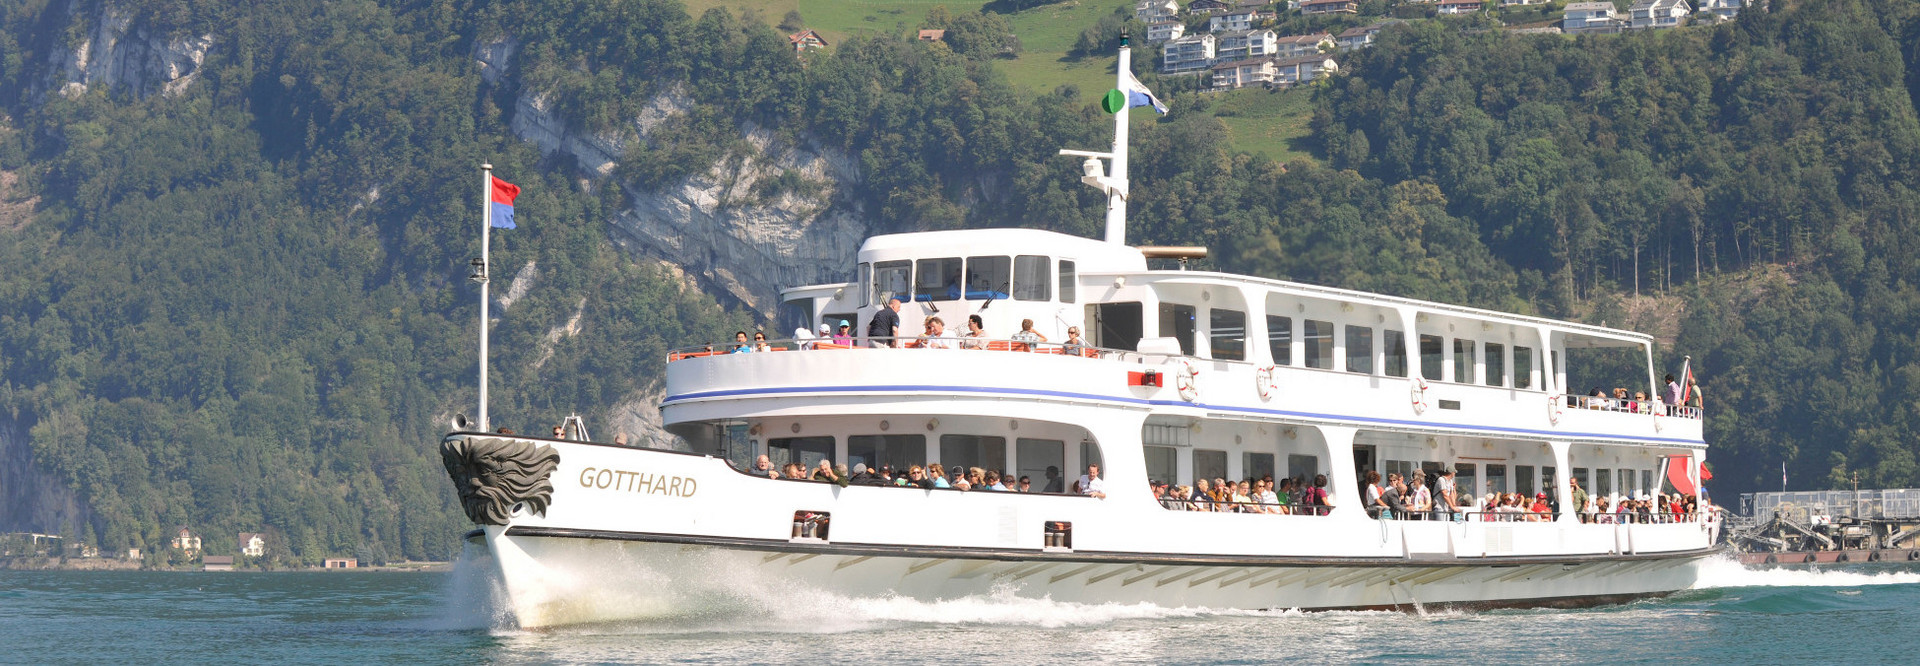 The motor vessel Gotthard sails on Lake Lucerne on a beautiful summer day.